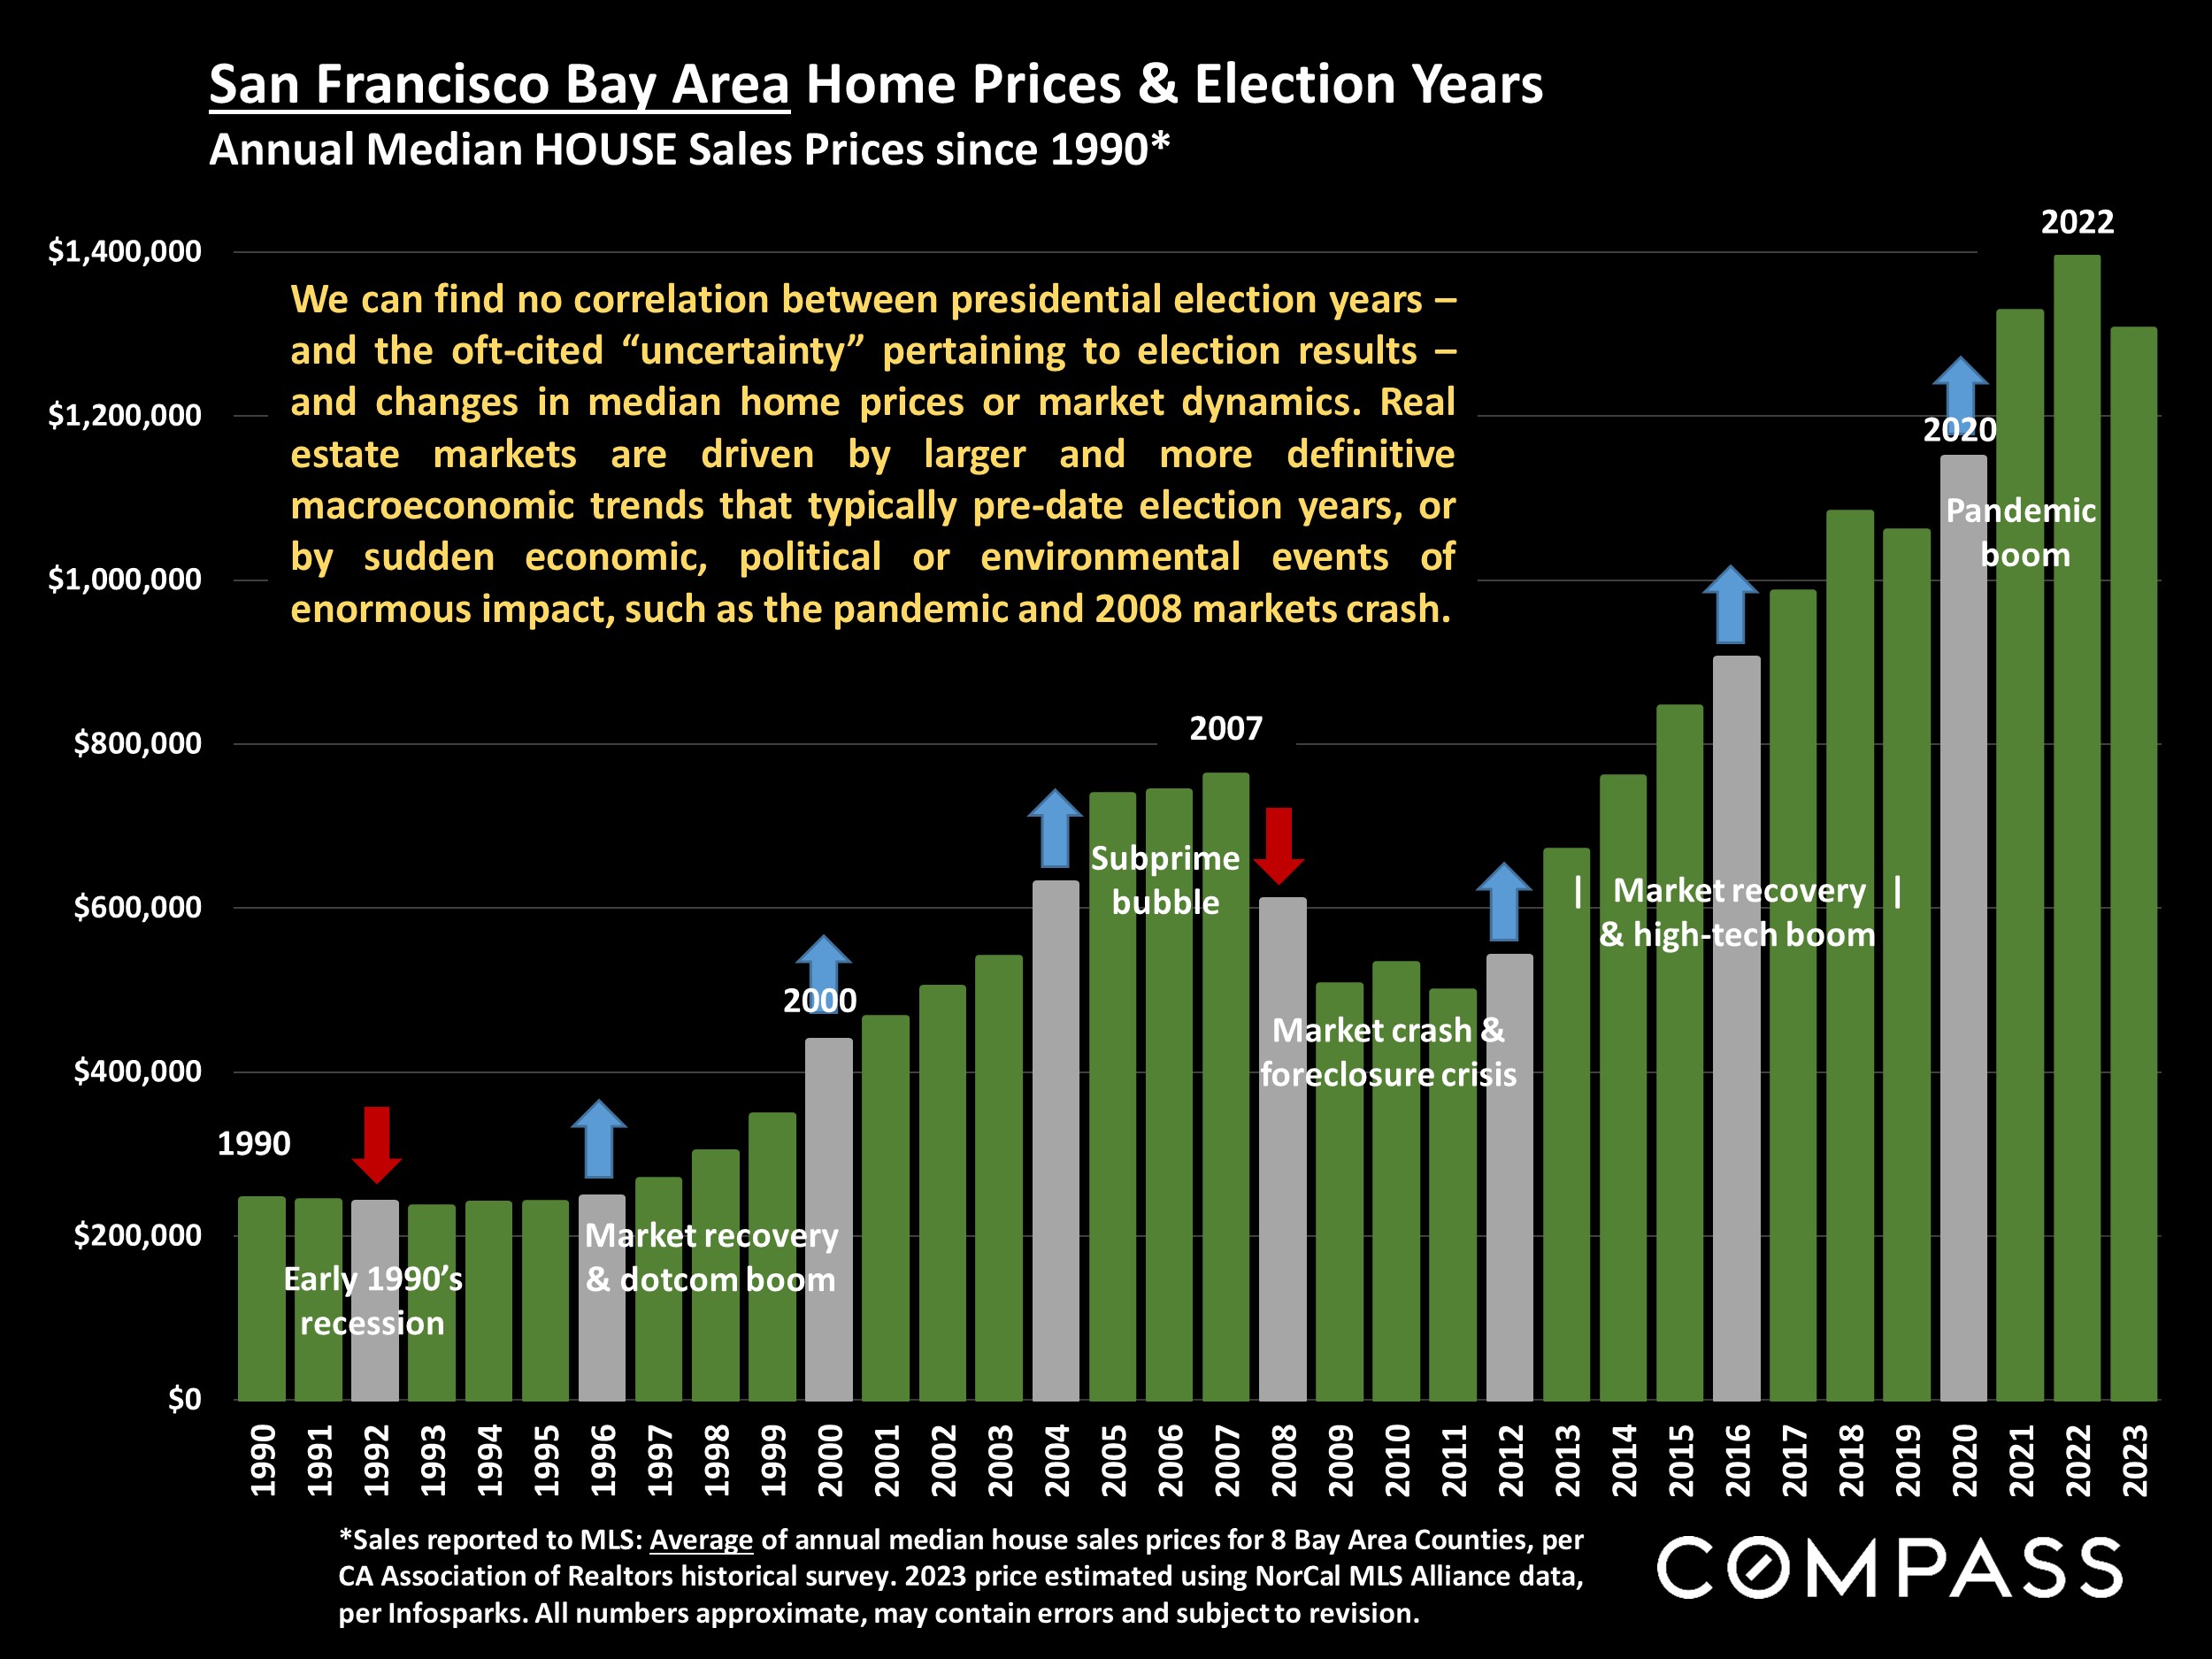 San Francisco Bay Area Home Prices & Election Years